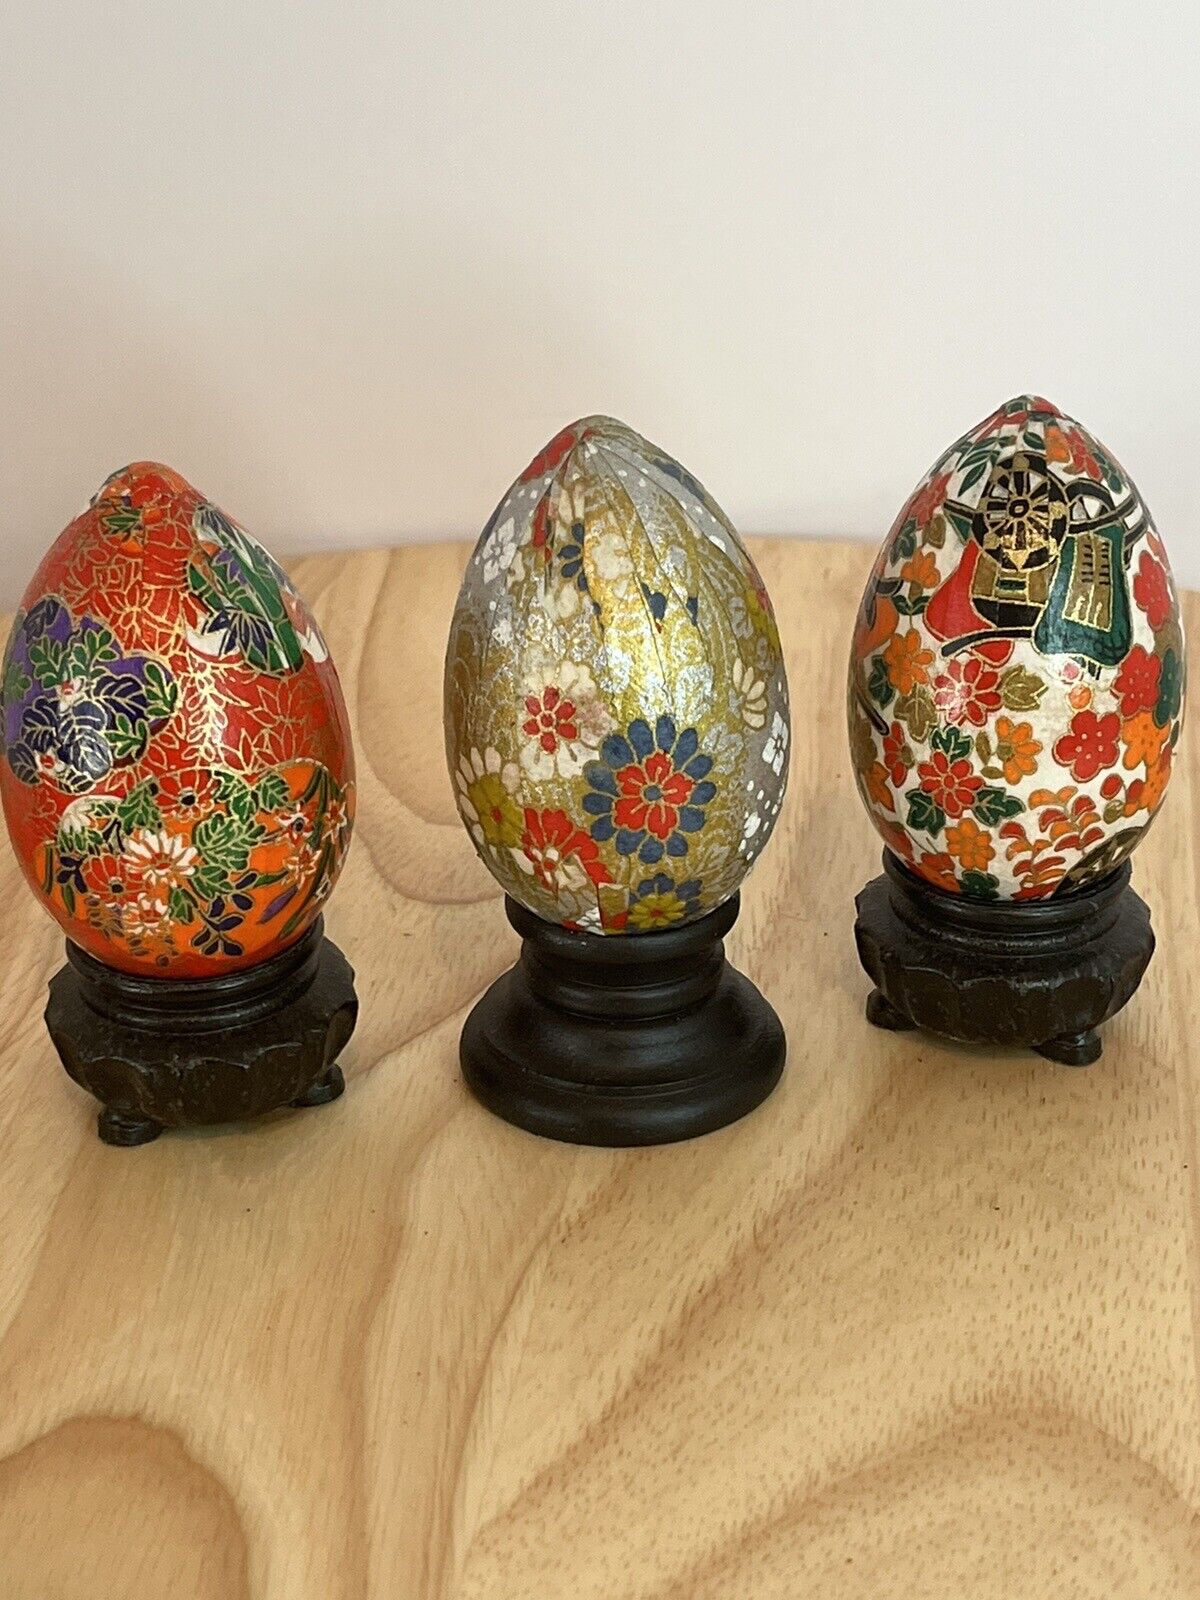 ThreeDecorative Eggs, Paper Mache Stands Included Floral Asian (?) Theme